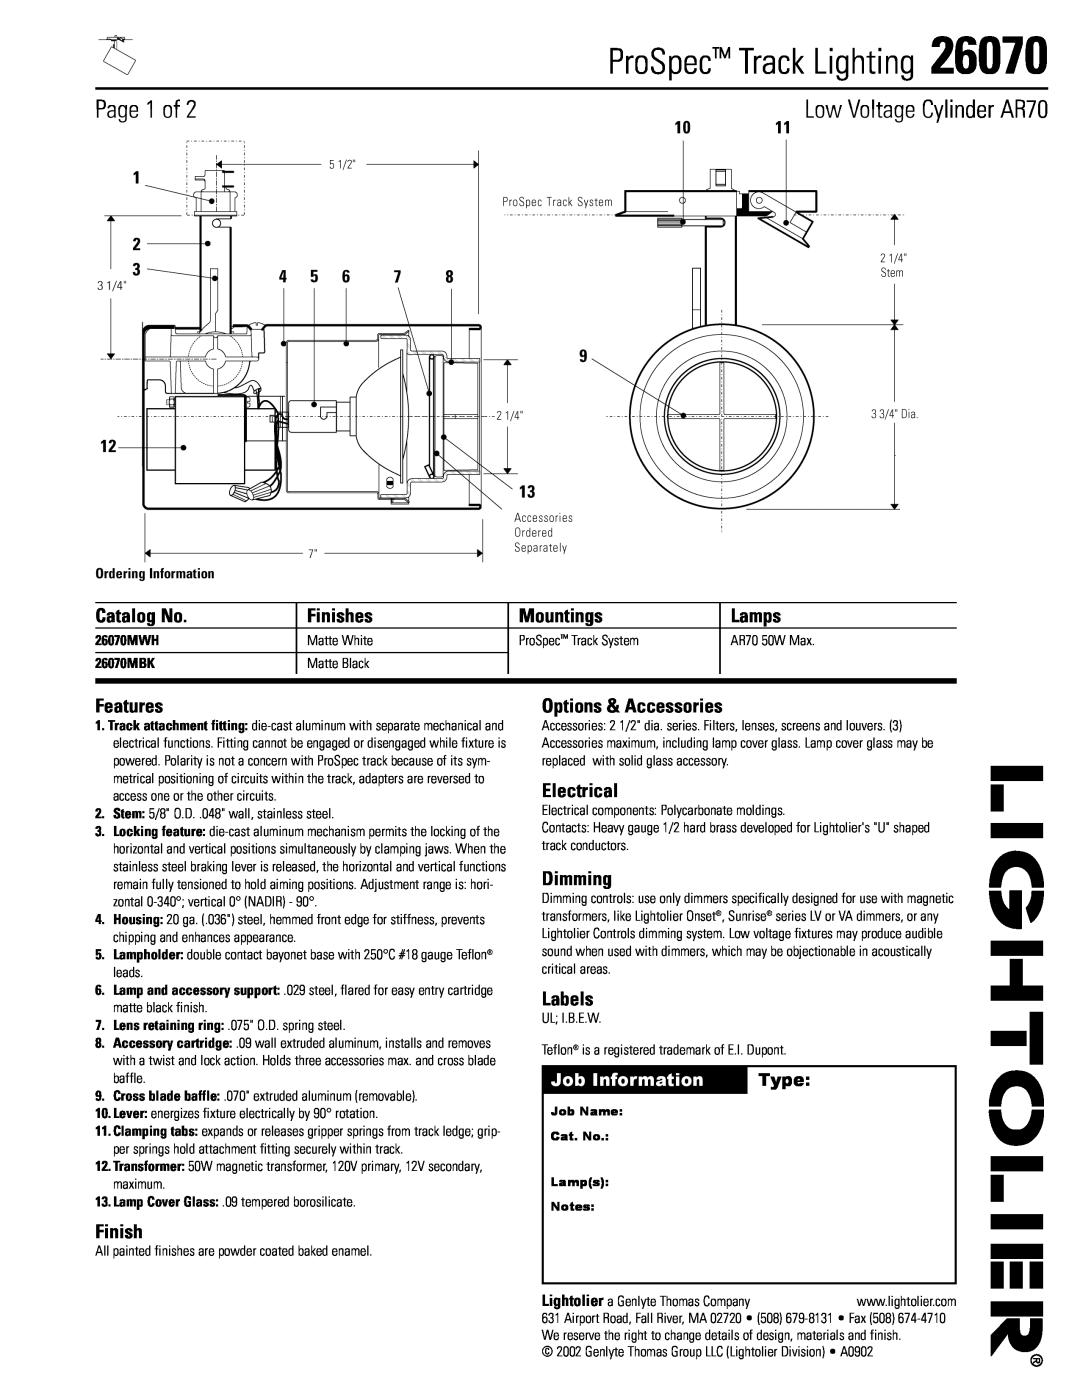 Lightolier 26070 manual ProSpec Track Lighting, Page 1 of, Catalog No, Finishes, Mountings, Lamps, Features, Electrical 